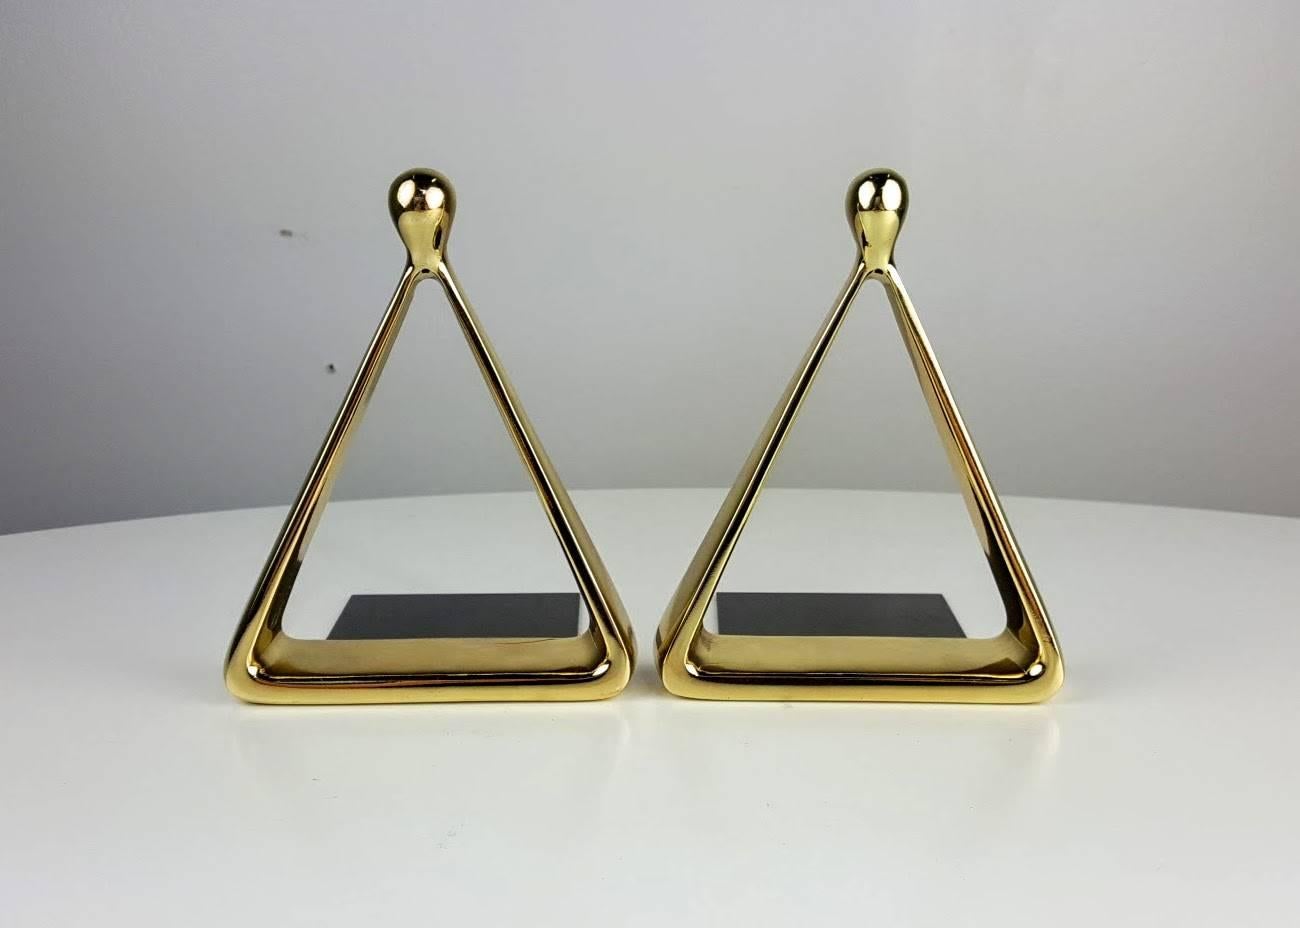 American Pristine Pair of Brass Stirrup Bookends by Ben Seibel for Jenfred Ware, 1950s